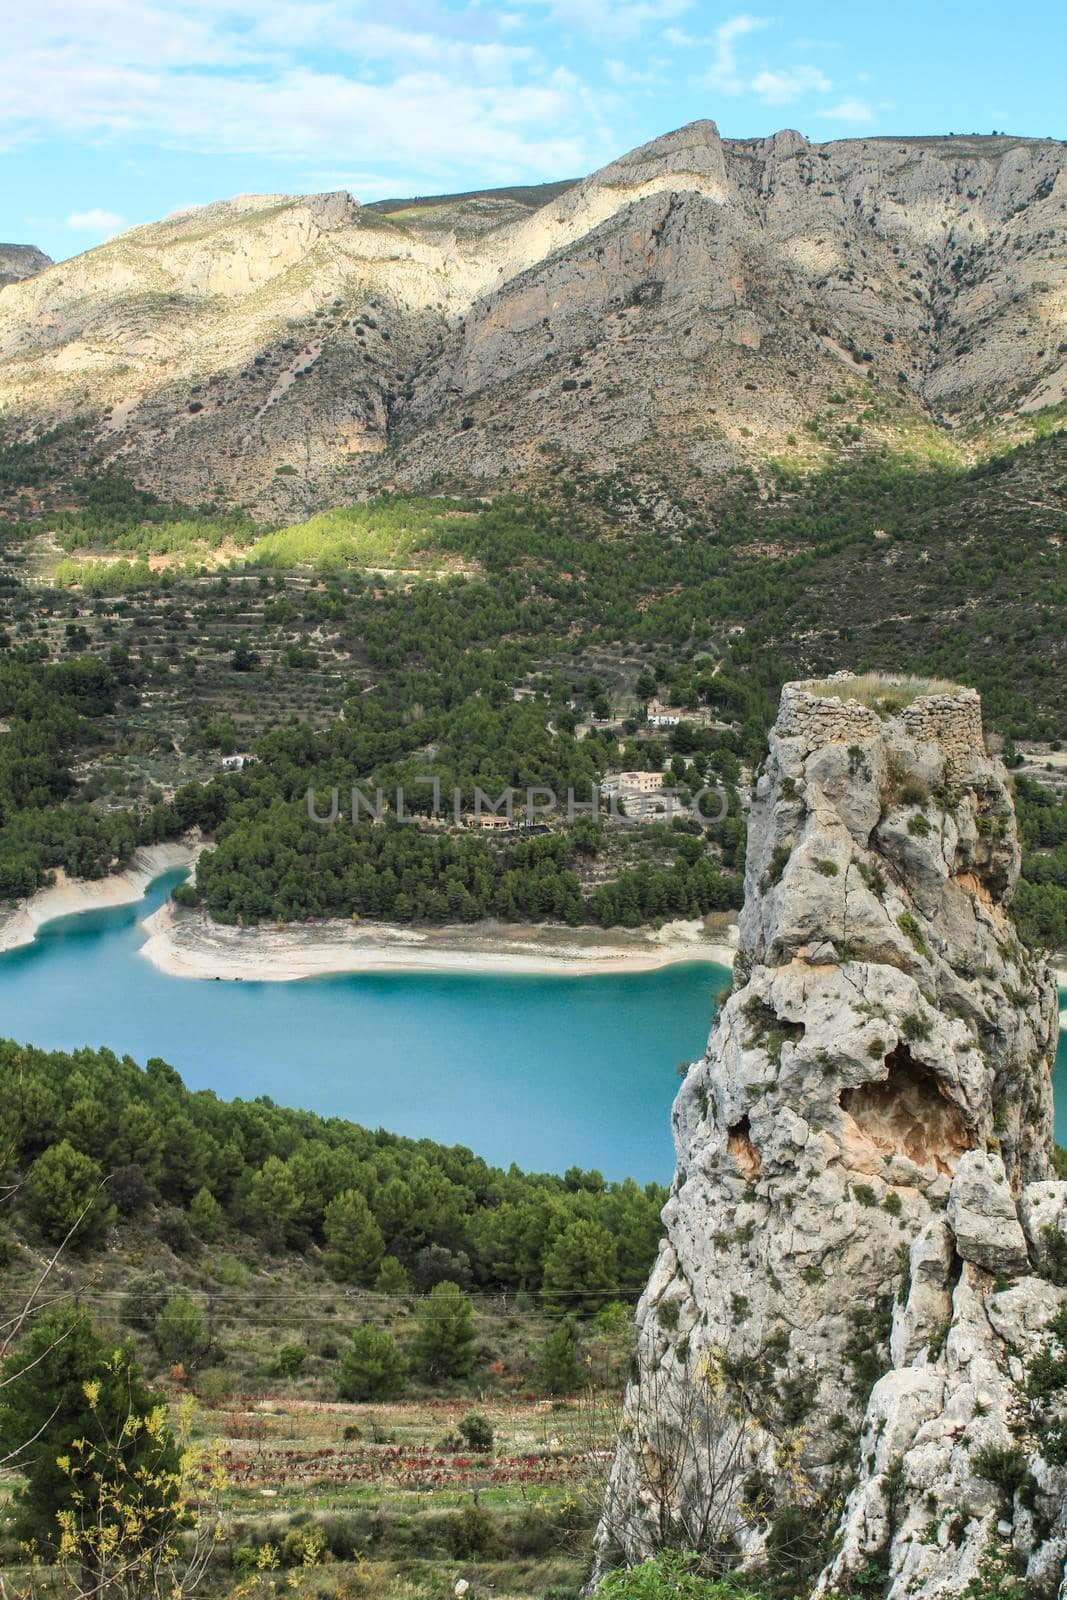 Beautiful view of Guadalest village surrounded by vegetation, mountains and the walls of the Castle